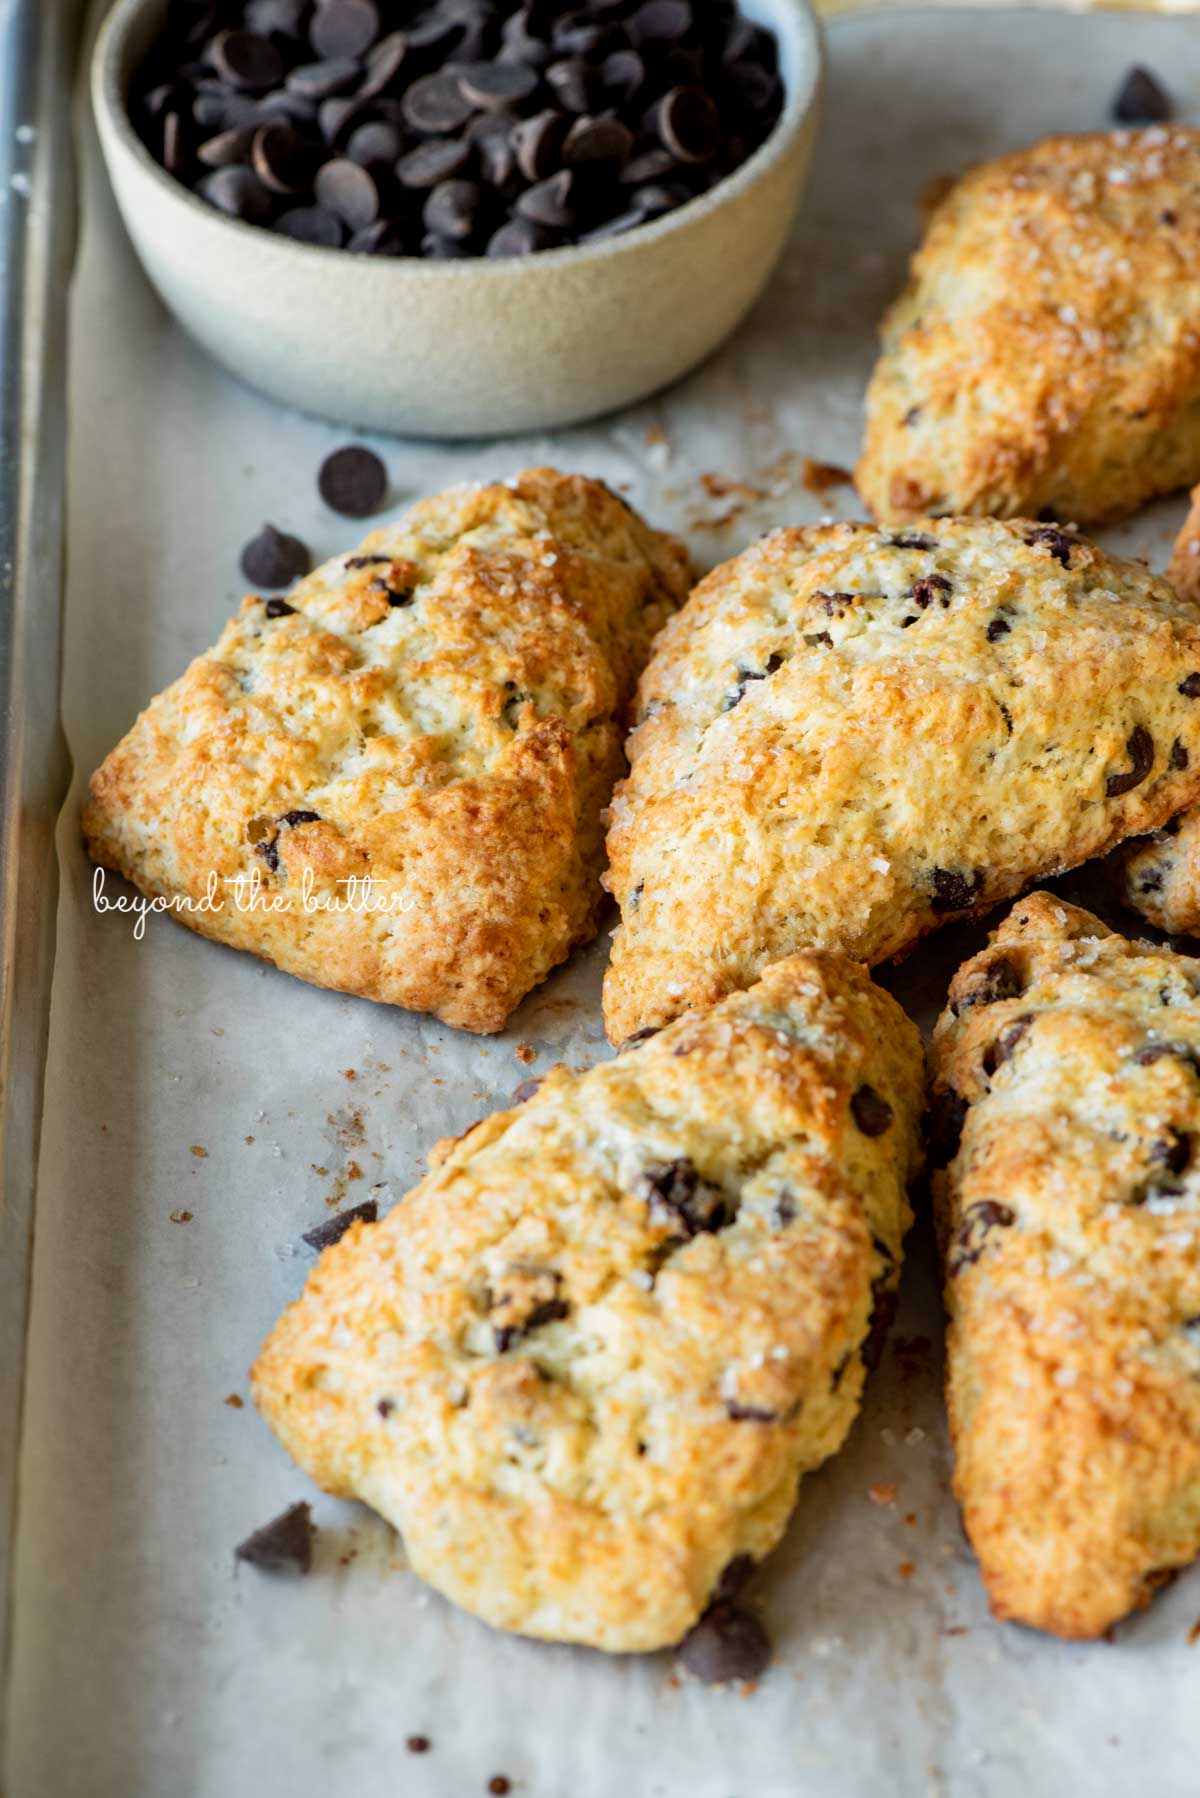 Freshly baked, soft and tender chocolate chip scones on a parchment paper lined baking sheet | © Beyond the Butter®